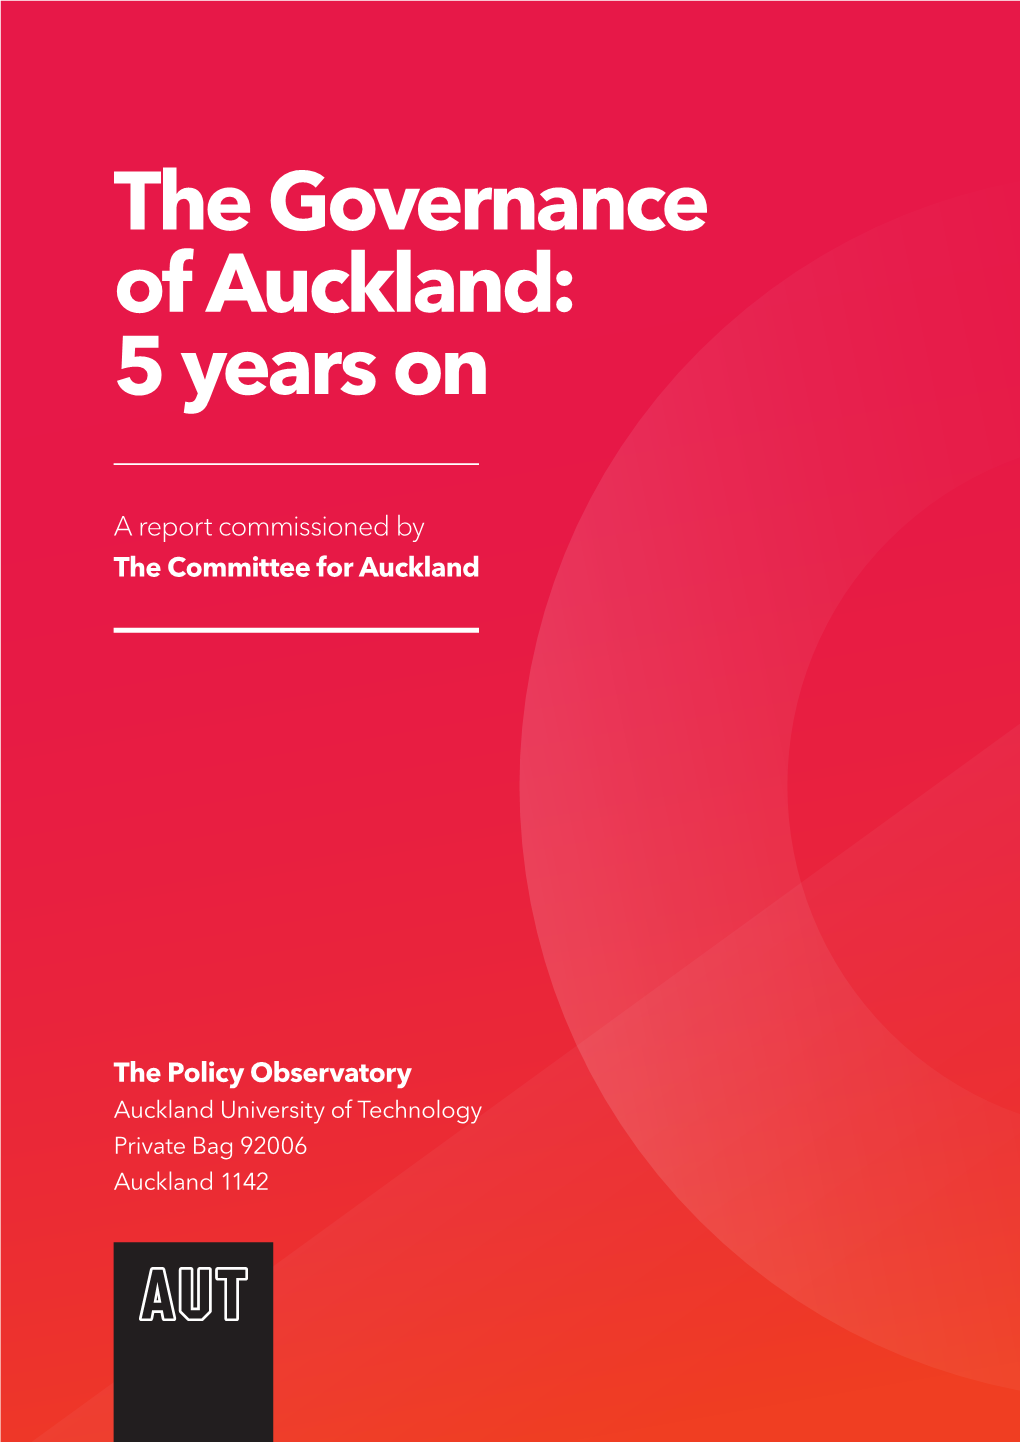 The Governance of Auckland: 5 Years On